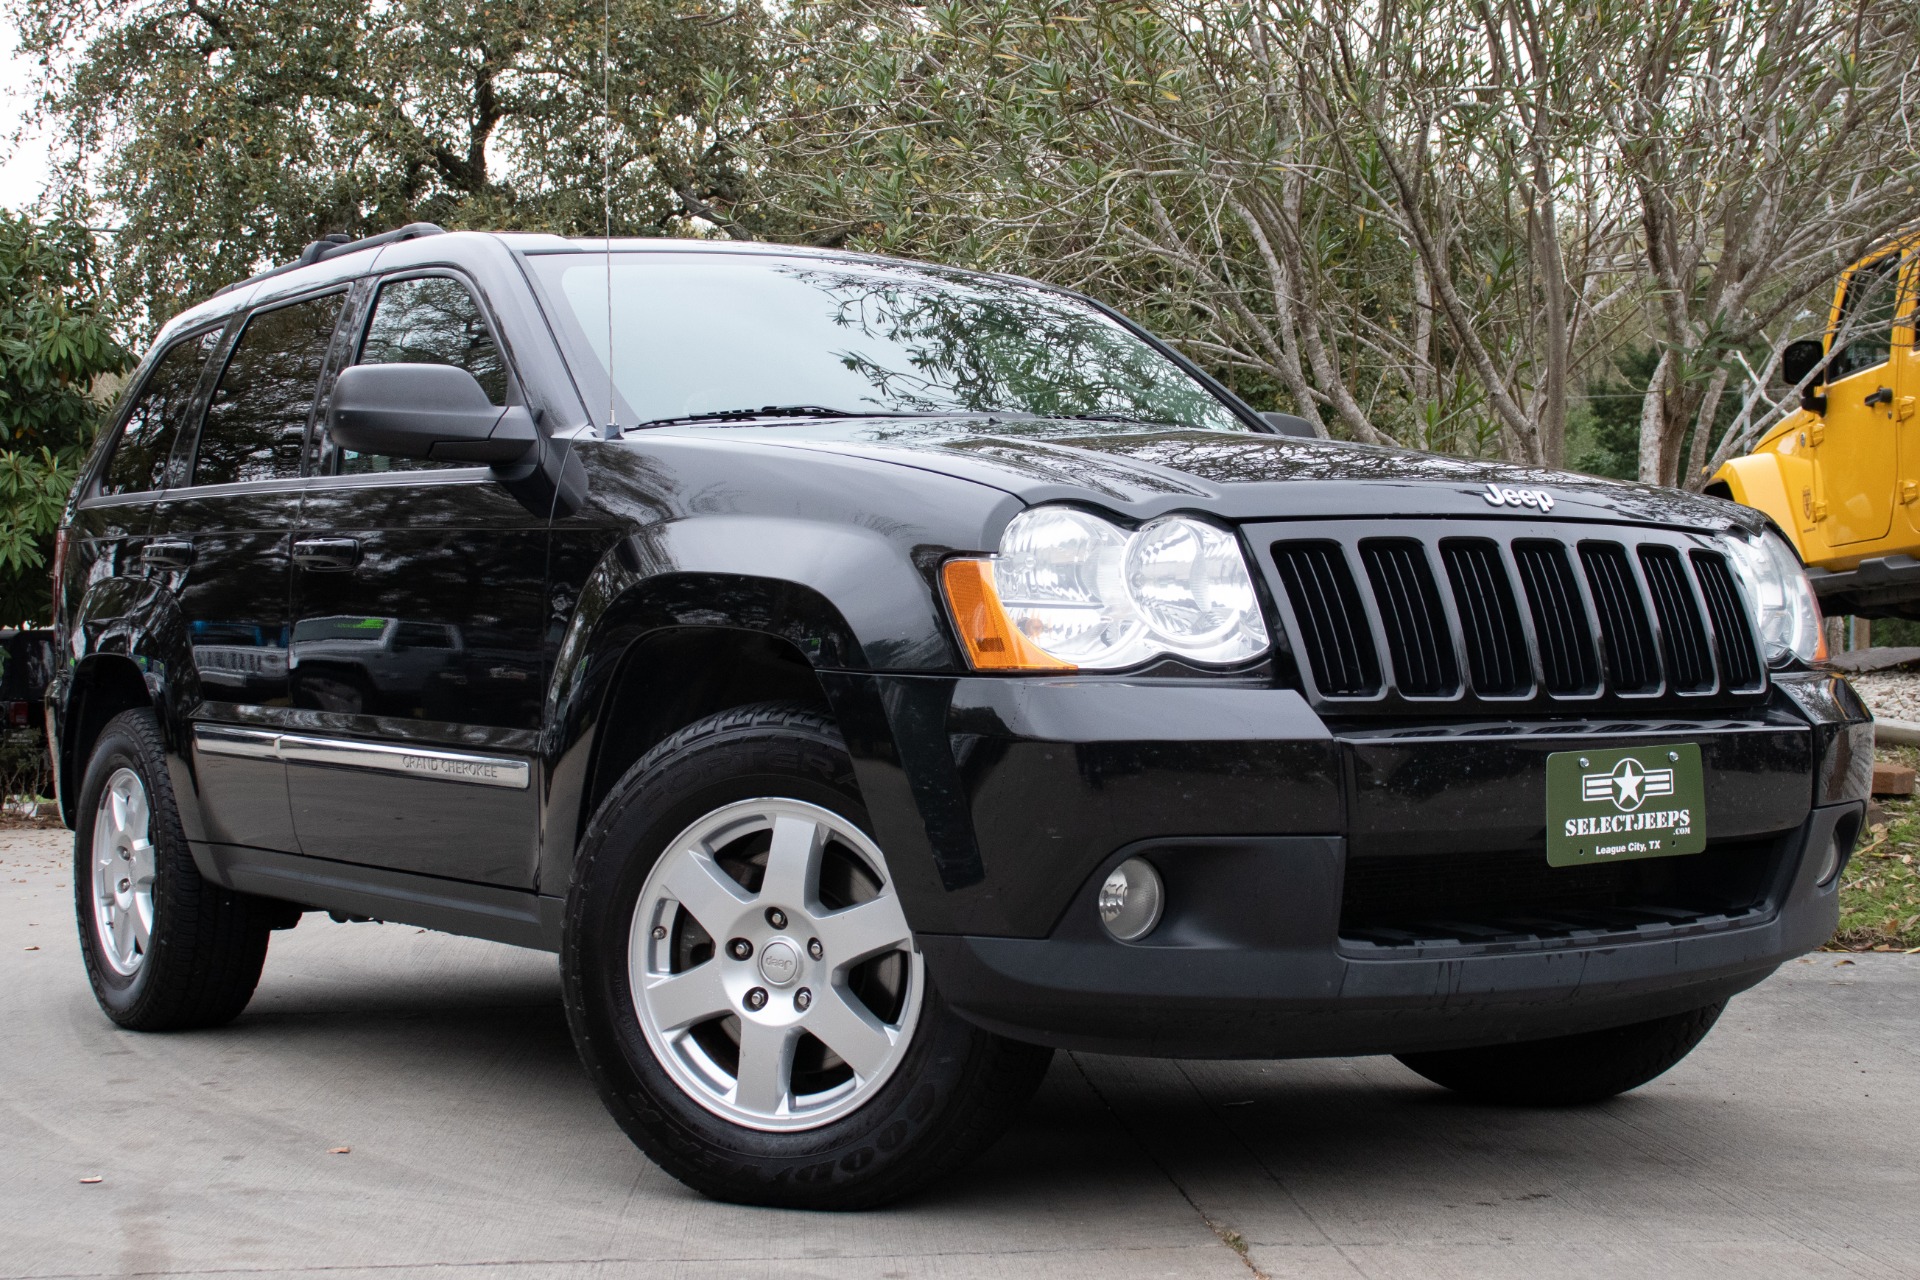 Used 2010 Jeep Grand Cherokee Srt8 For Sale In Houston Tx Cargurus